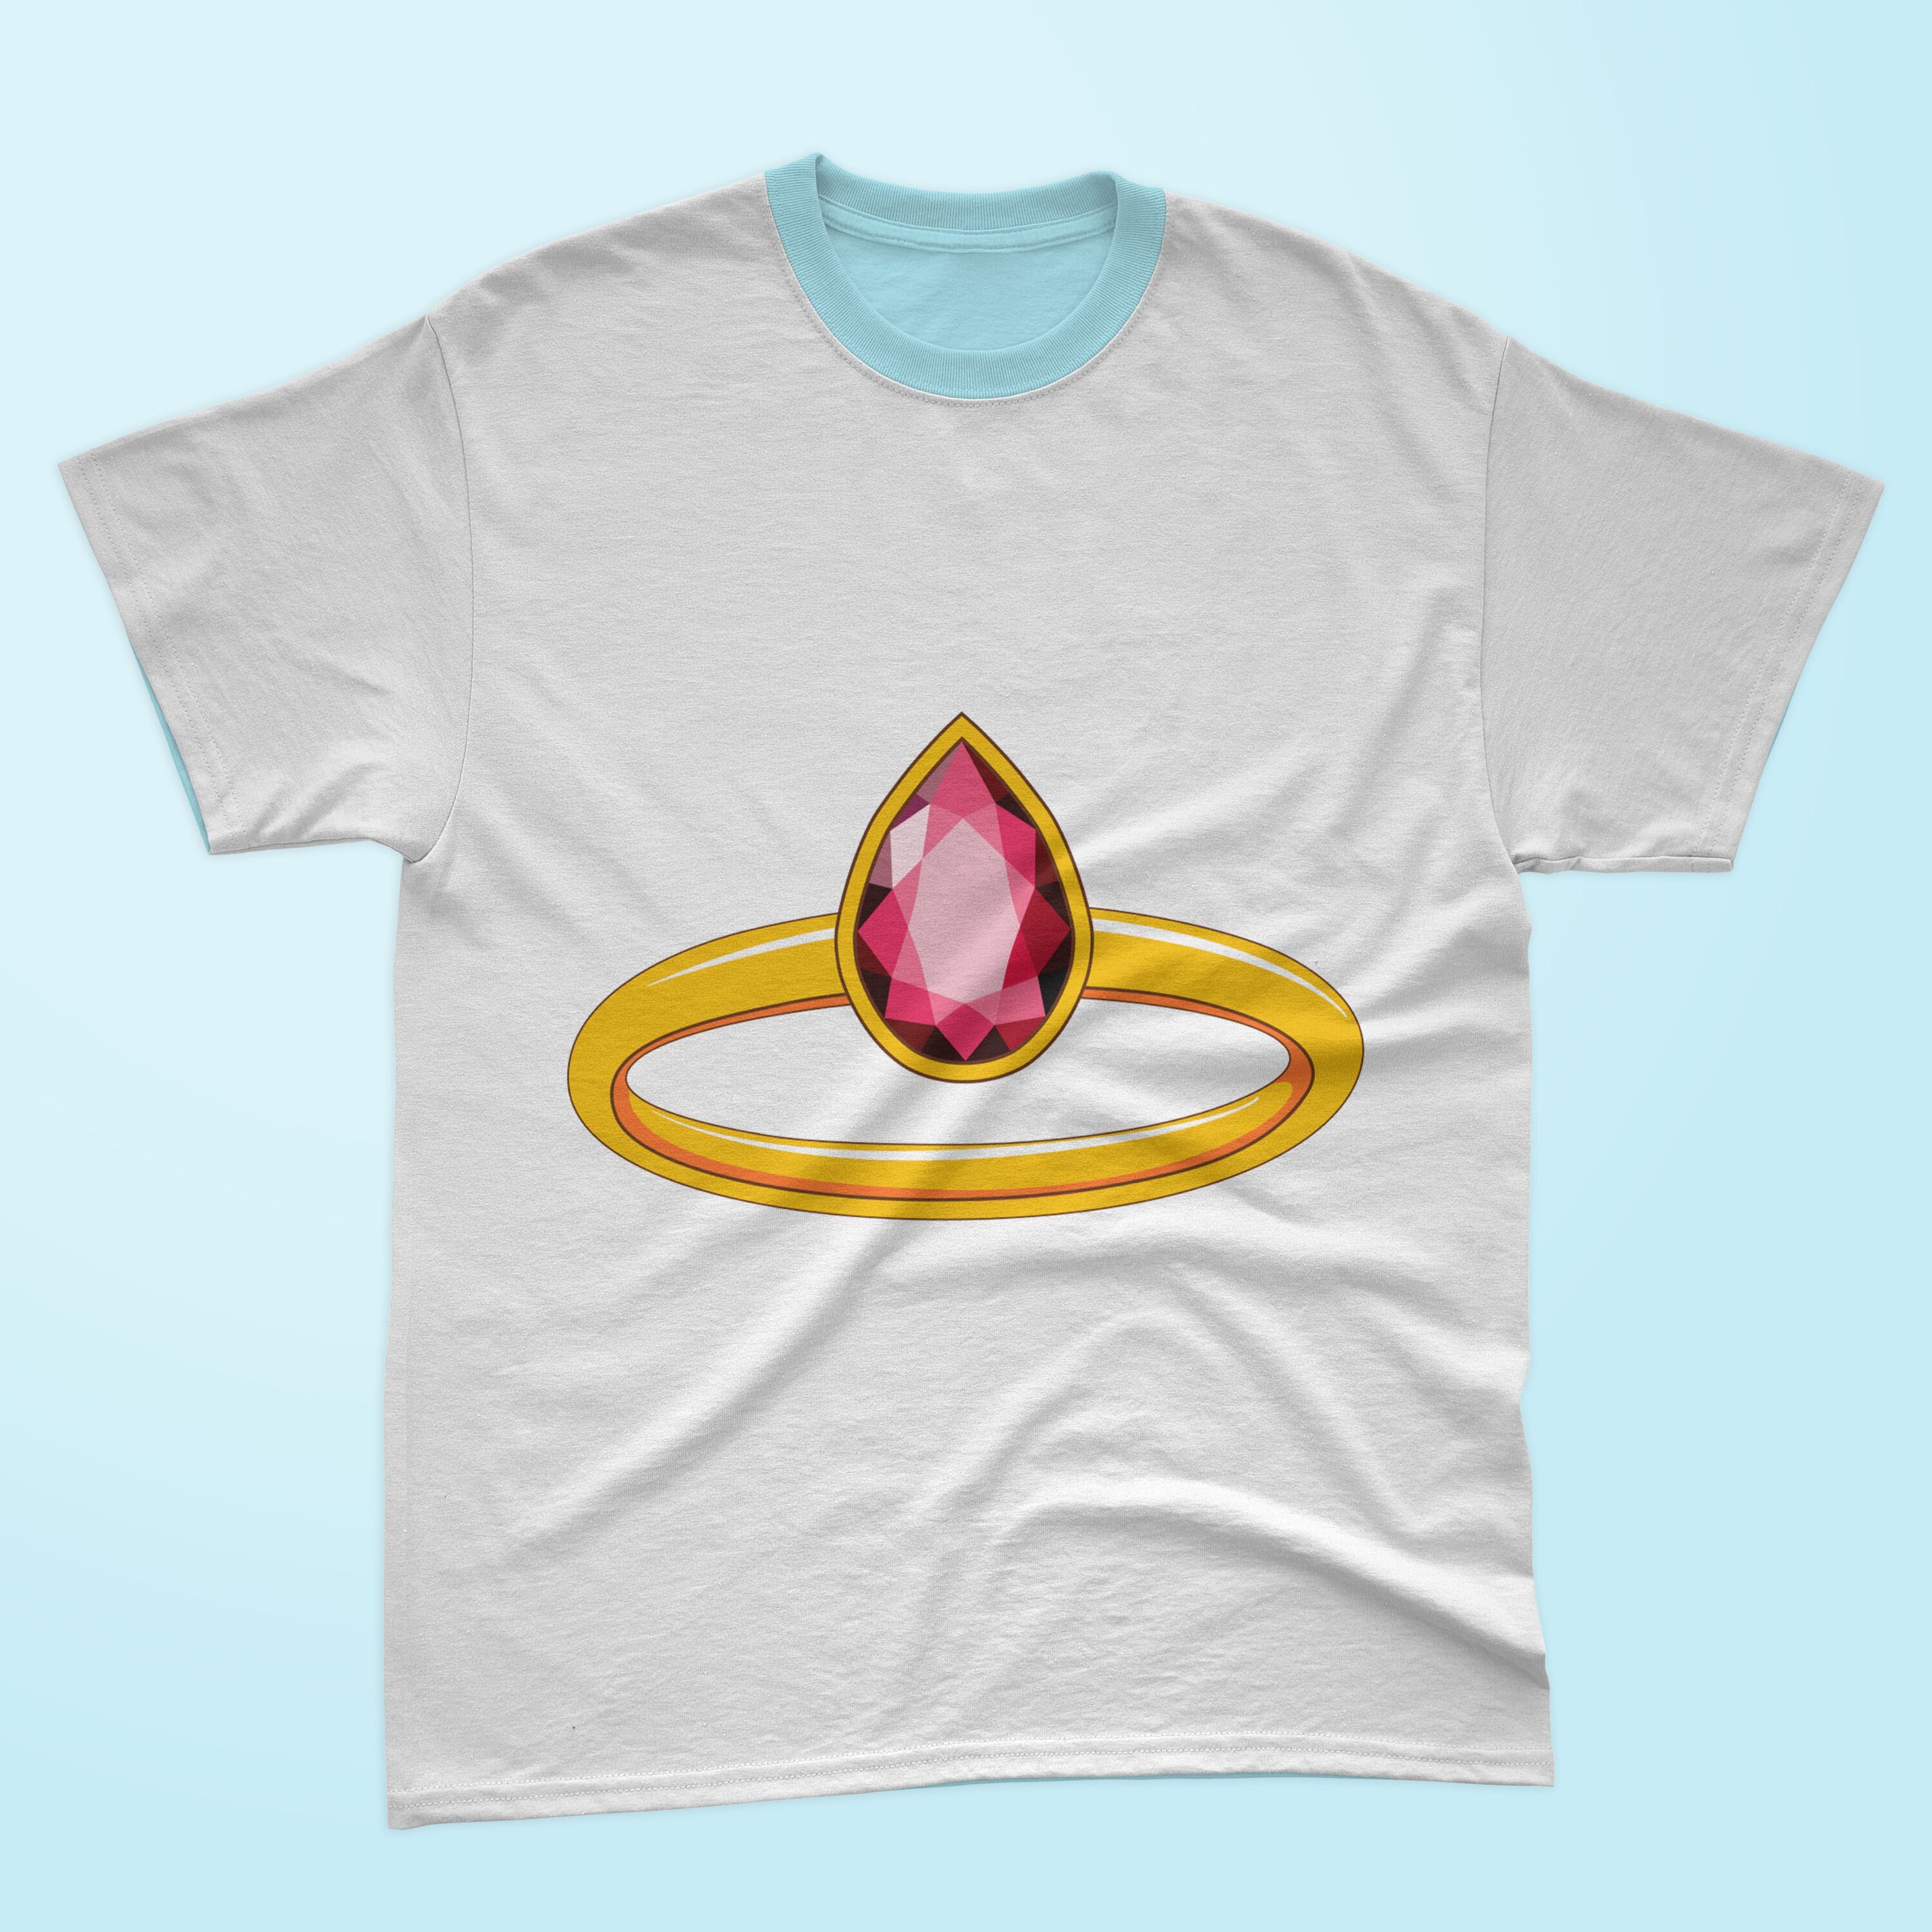 Image of a white t-shirt with a wonderful ring print.